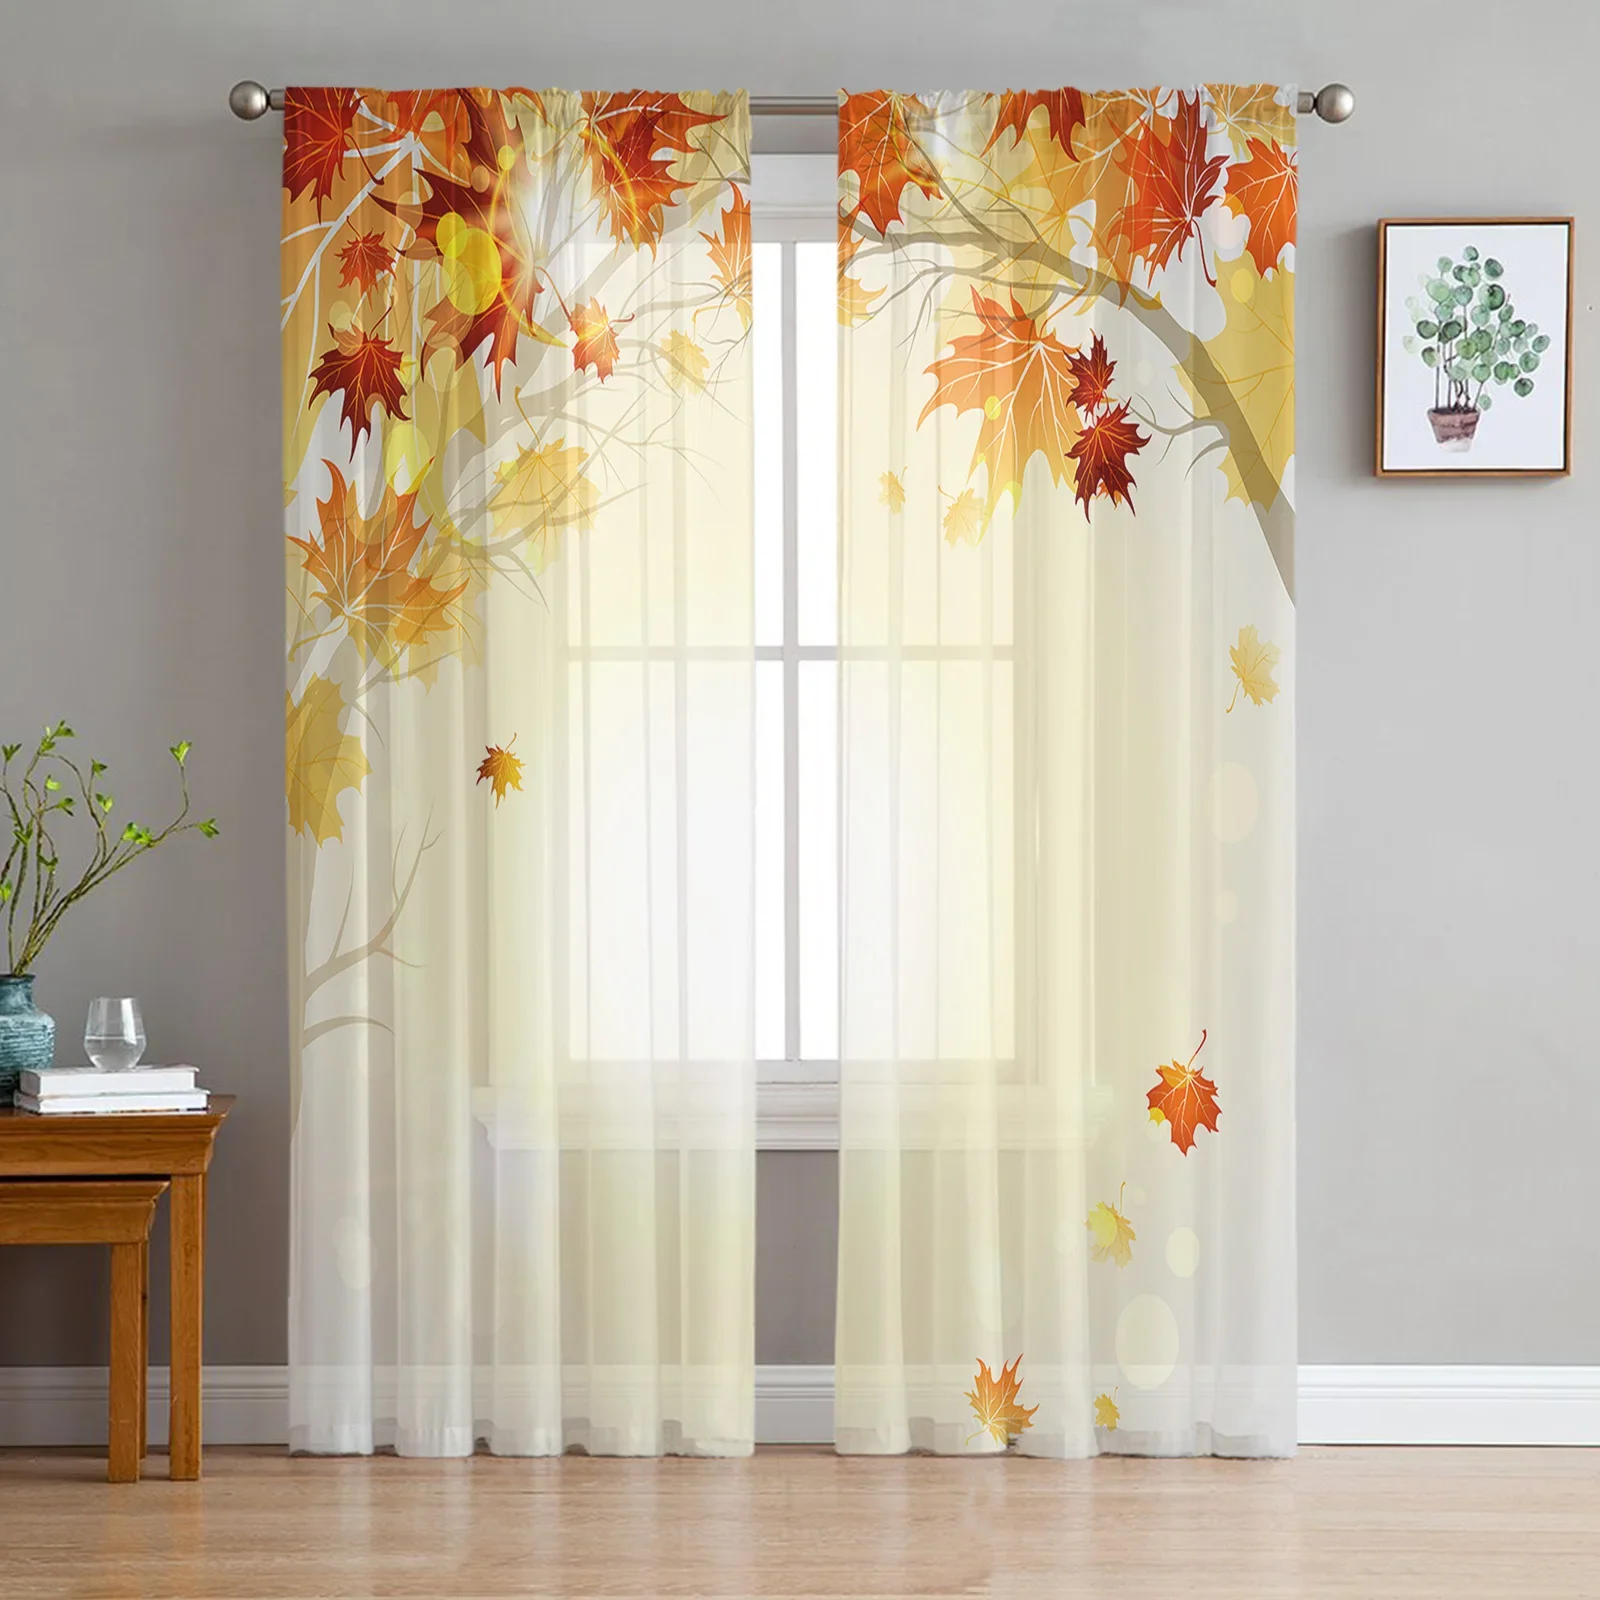 

Autumn Leaves Yellow Maple Leaf Tulle Sheer Curtains for Living Room Decoration Window Curtain for Bedroom Voile Organza Drapes